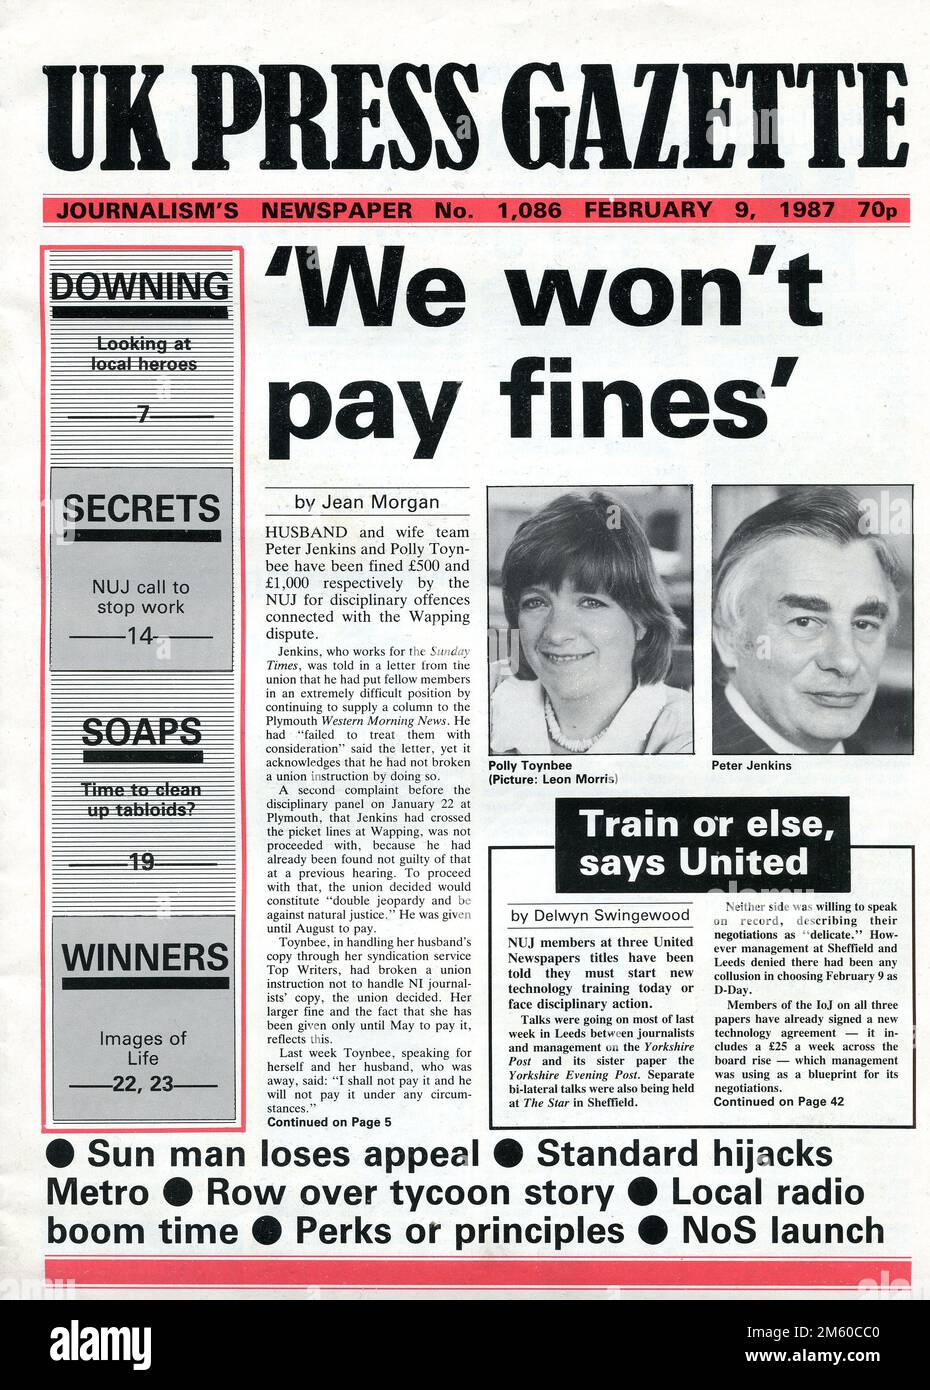 An issue of journalists weekly trade magazine UK Press Gazette dated February 9, 1987. First launched in November 1965, the print edition ceased publication in 2013. Stock Photo